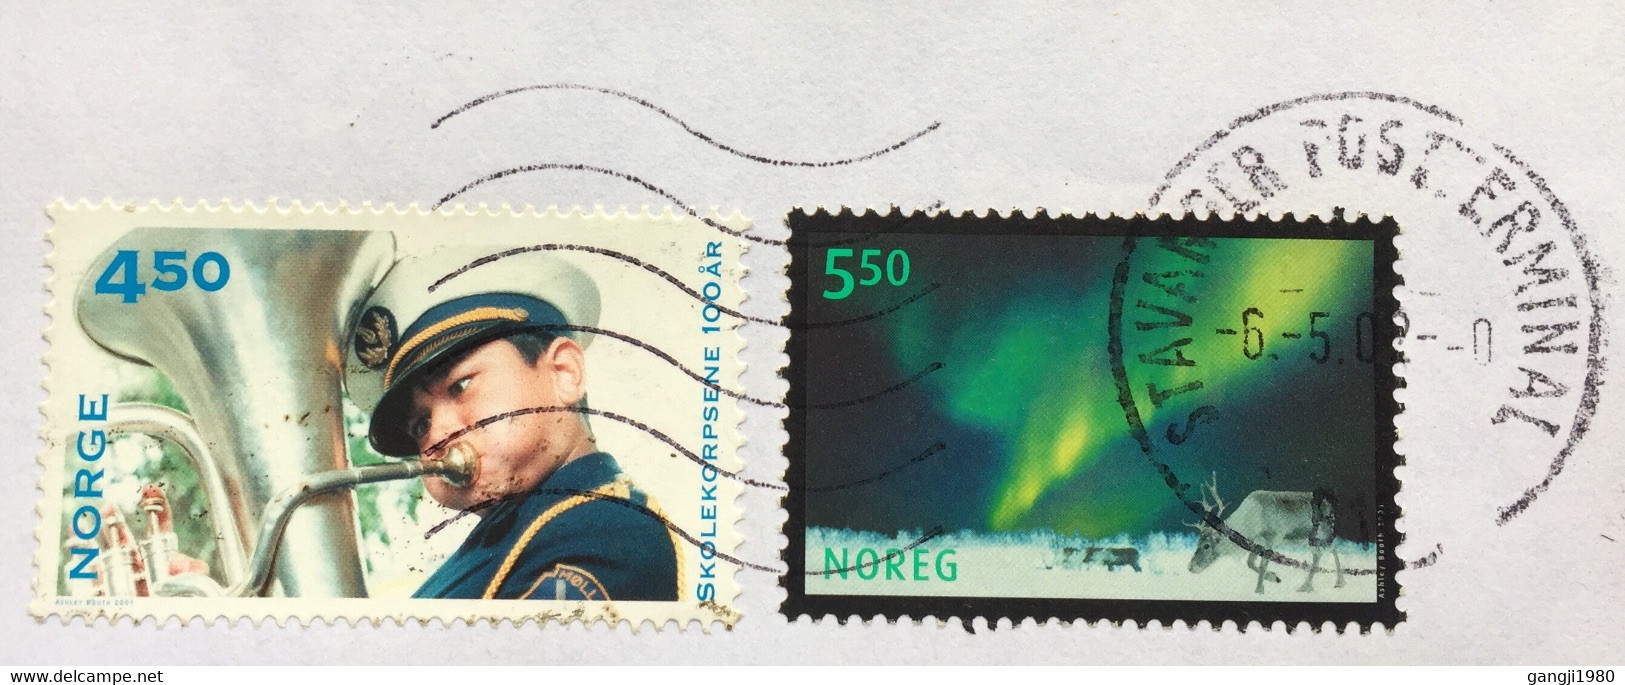 NORWAY 2002, USED AIRMAIL COVER TO INDIA,2 STAMPS ,MUSIC,ANIMAL,NATURE STAVANGER CANCELLATION - Storia Postale